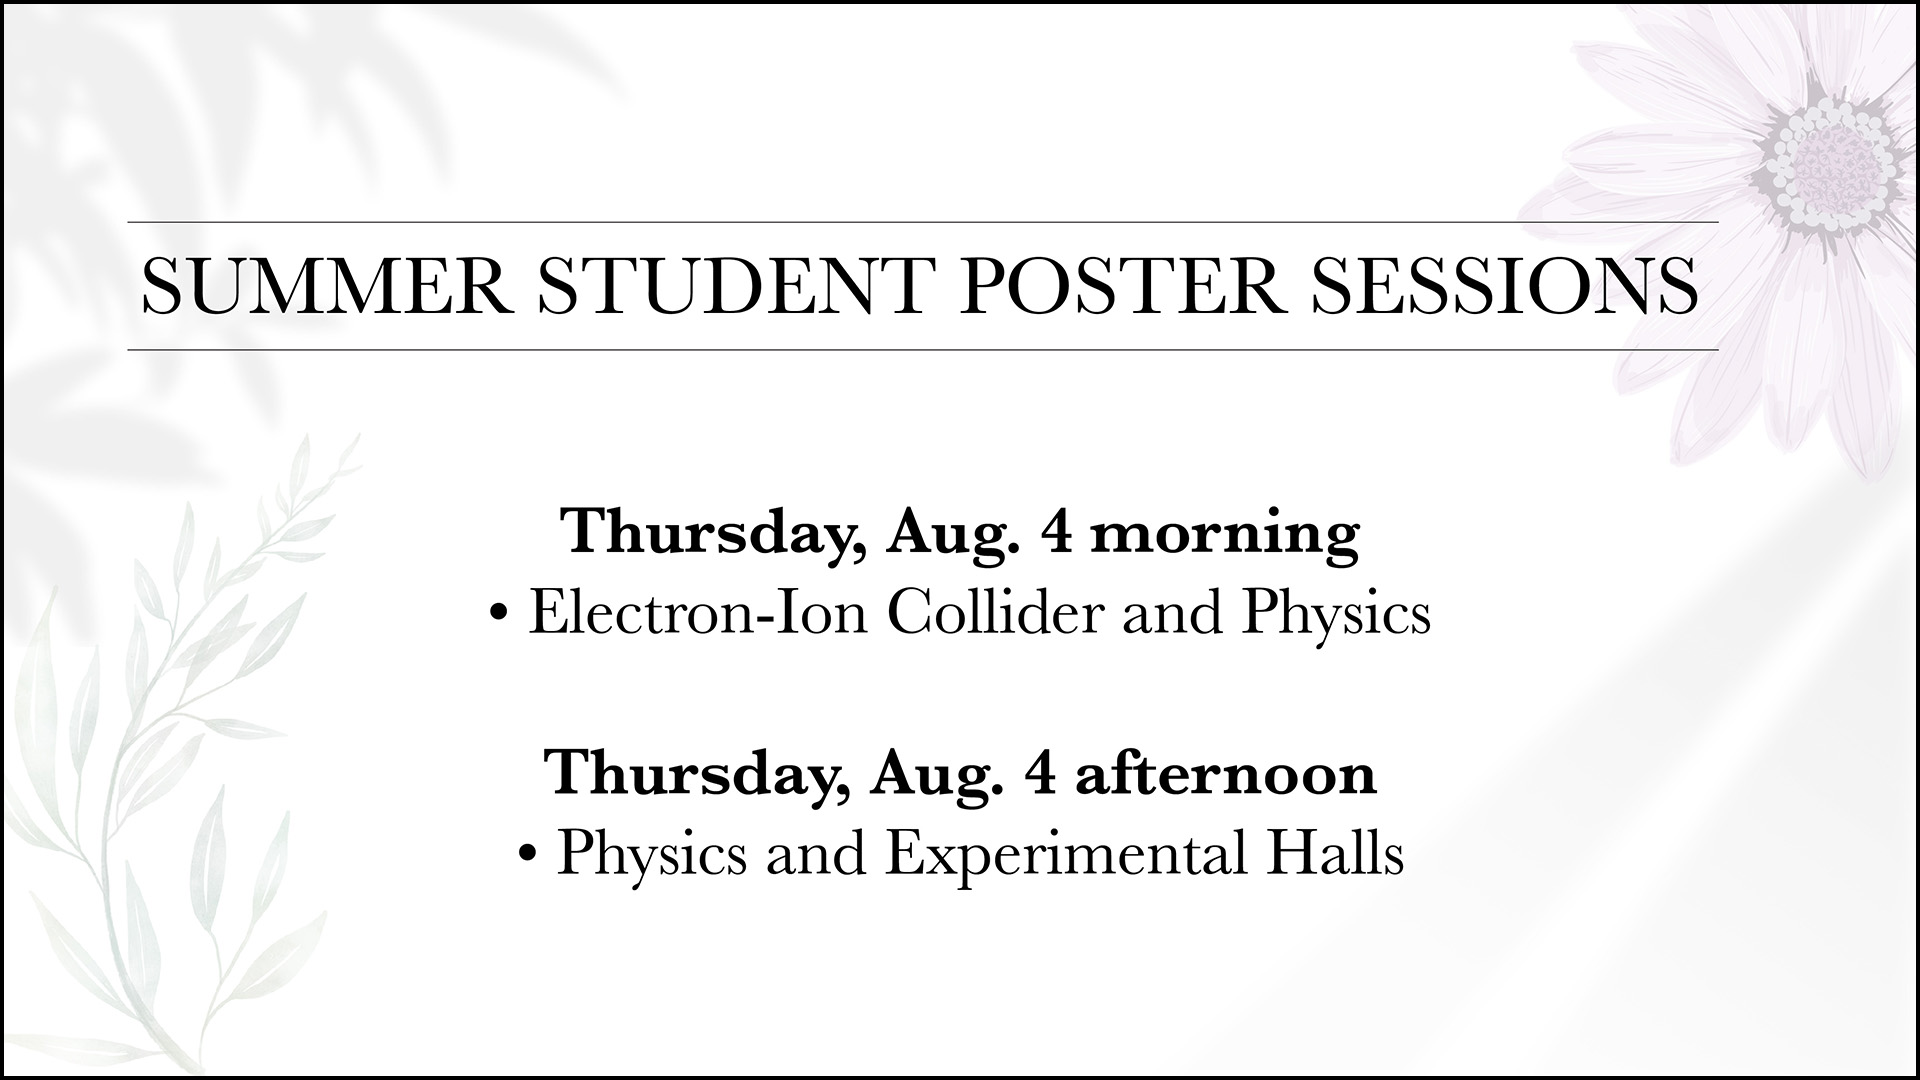 Summer Science Poster Sessions - Thursday (see release text)